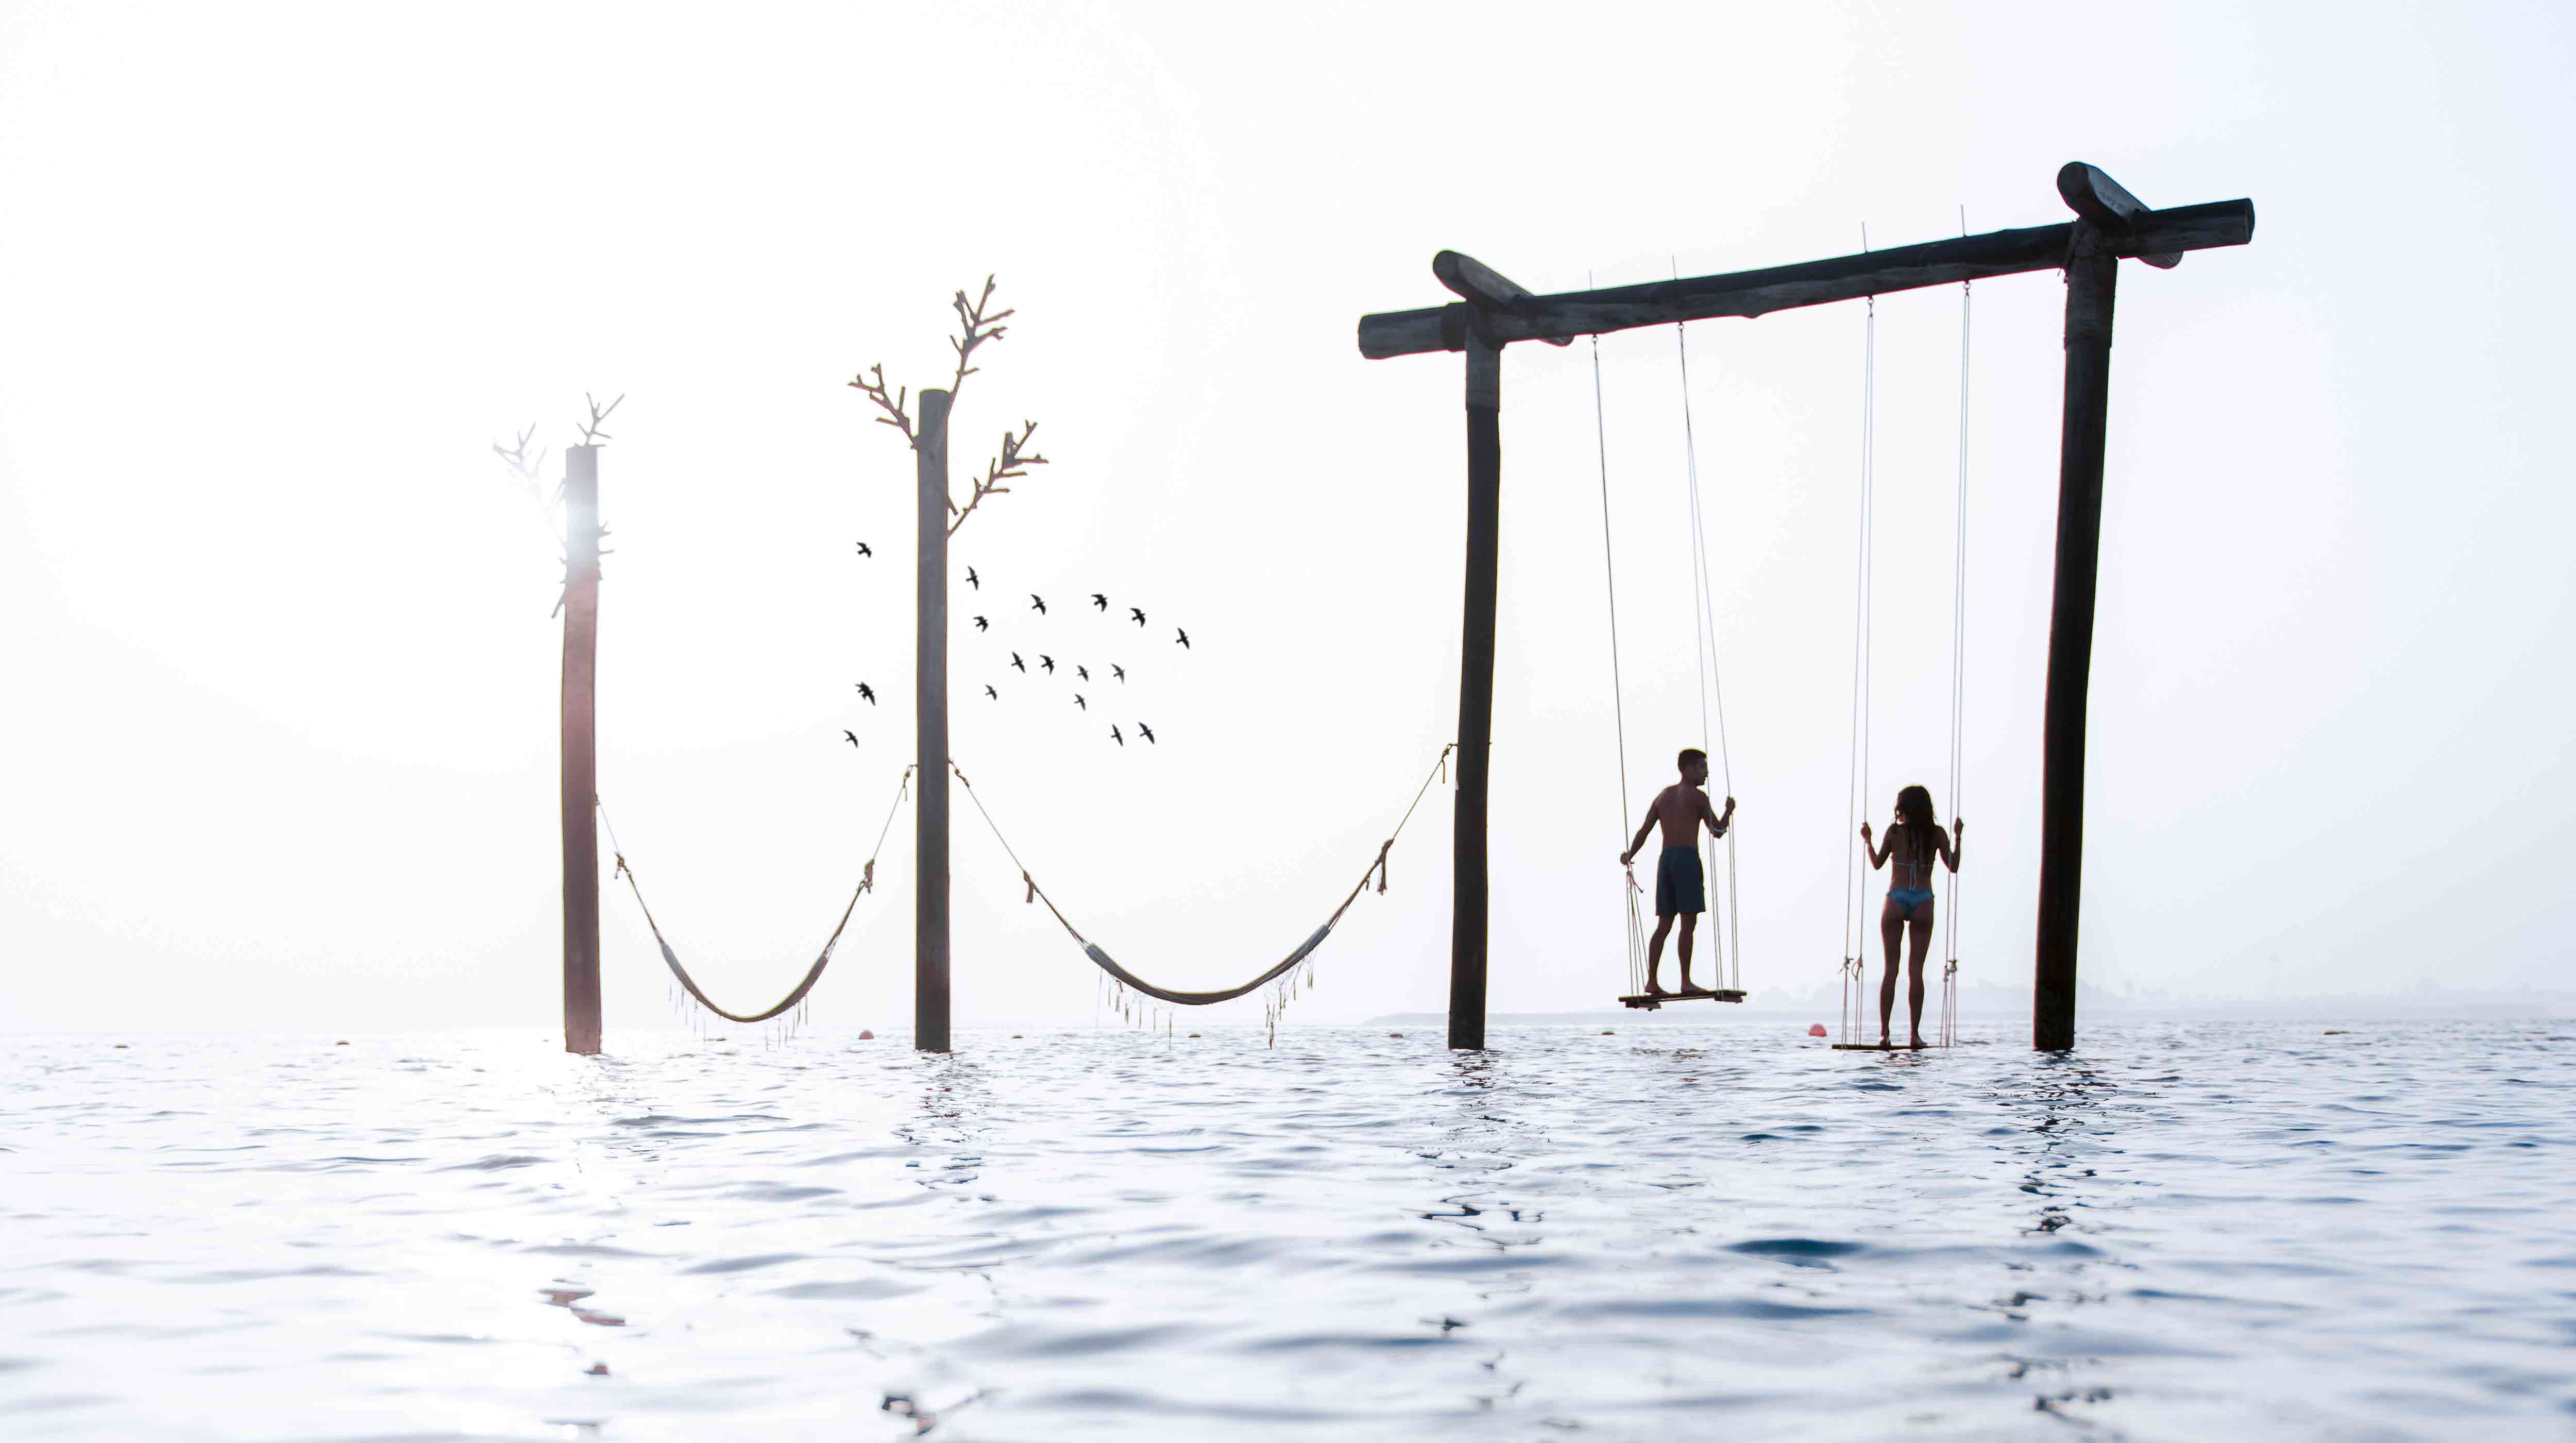 Man and woman standing on swings in the middle of the sea